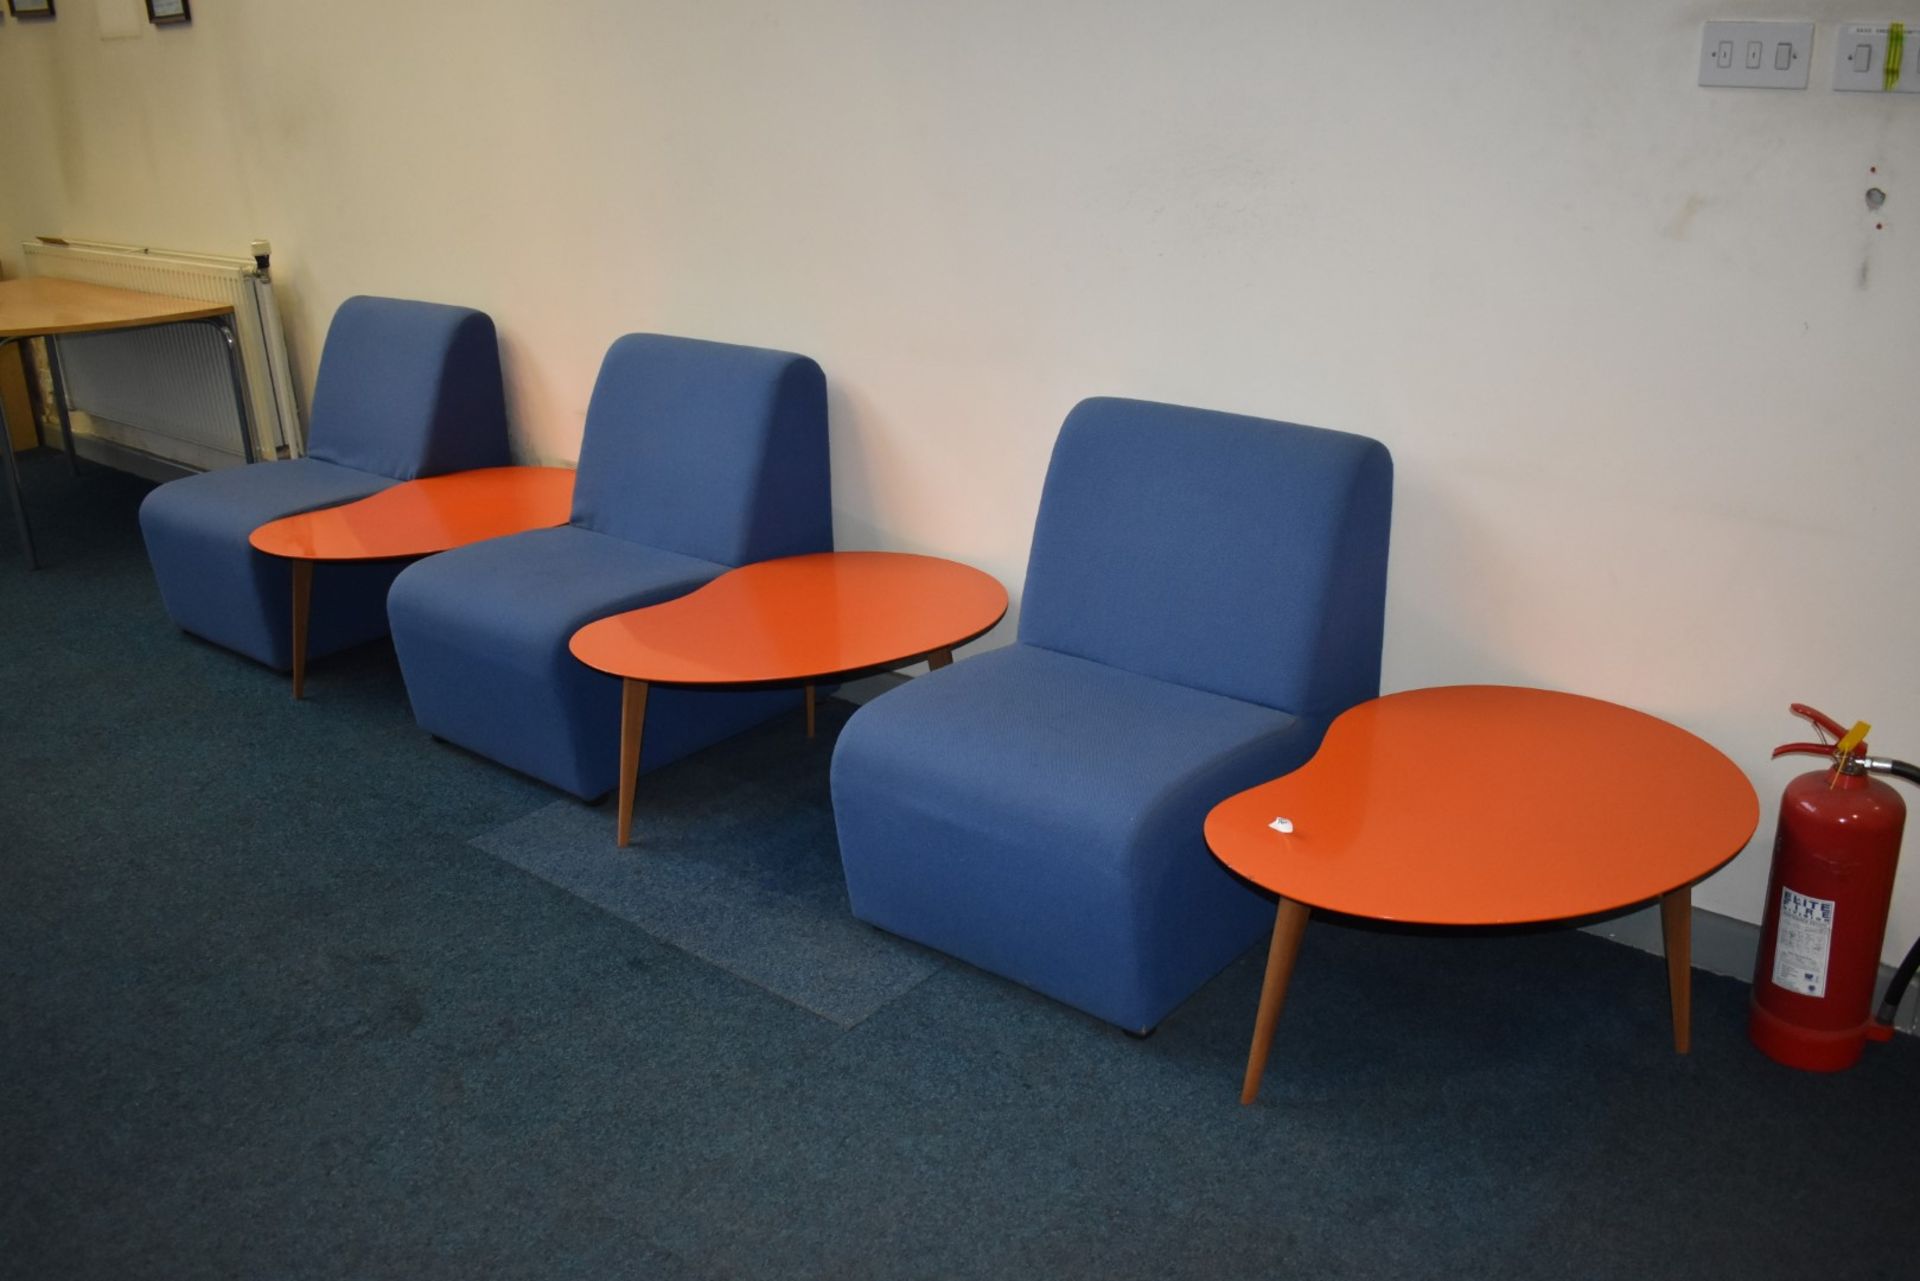 3 x Modular Reception Chairs in Blue - Ref FE000 ODS - CL480 - Location: Nottingham NG15Tables not